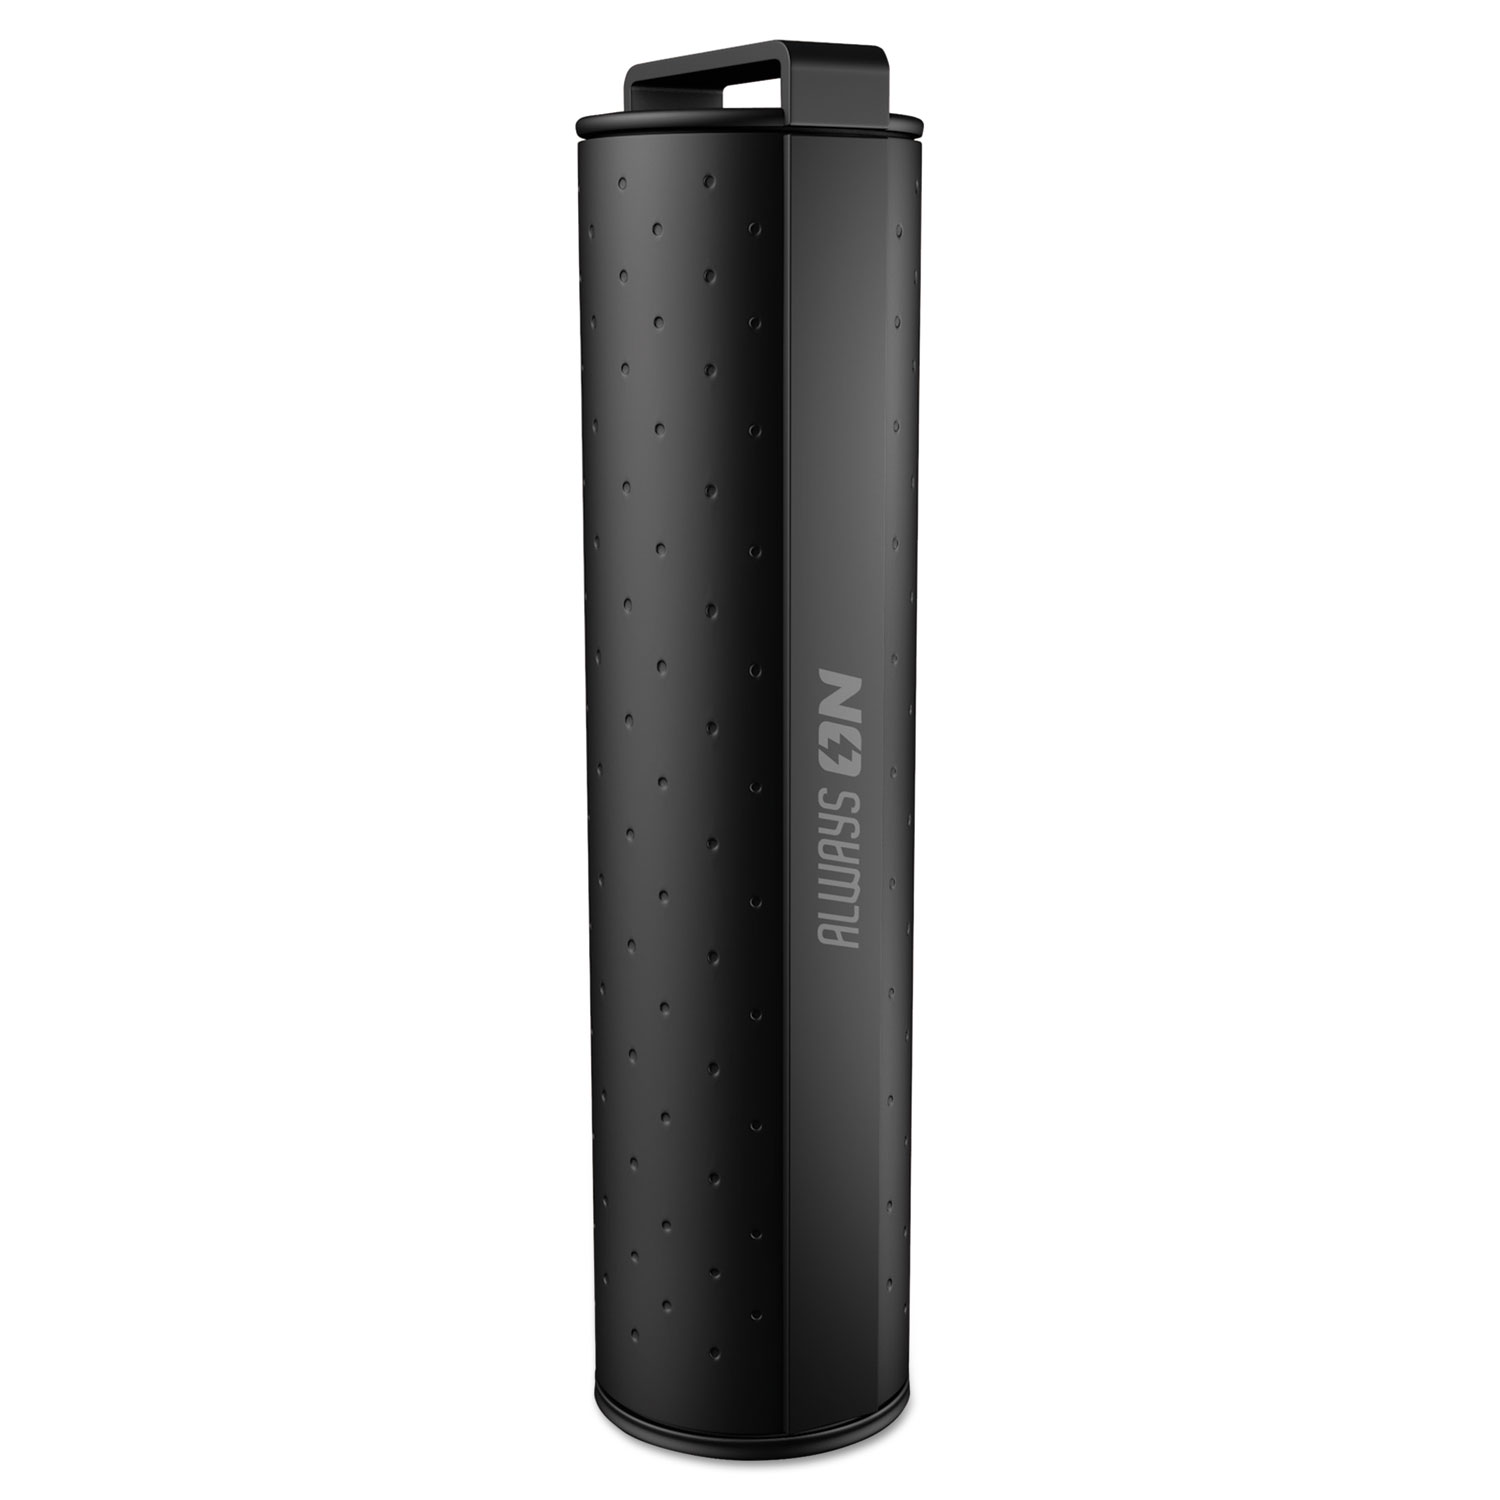 Power Pack Charger, 2200 mAh, USB, Gray